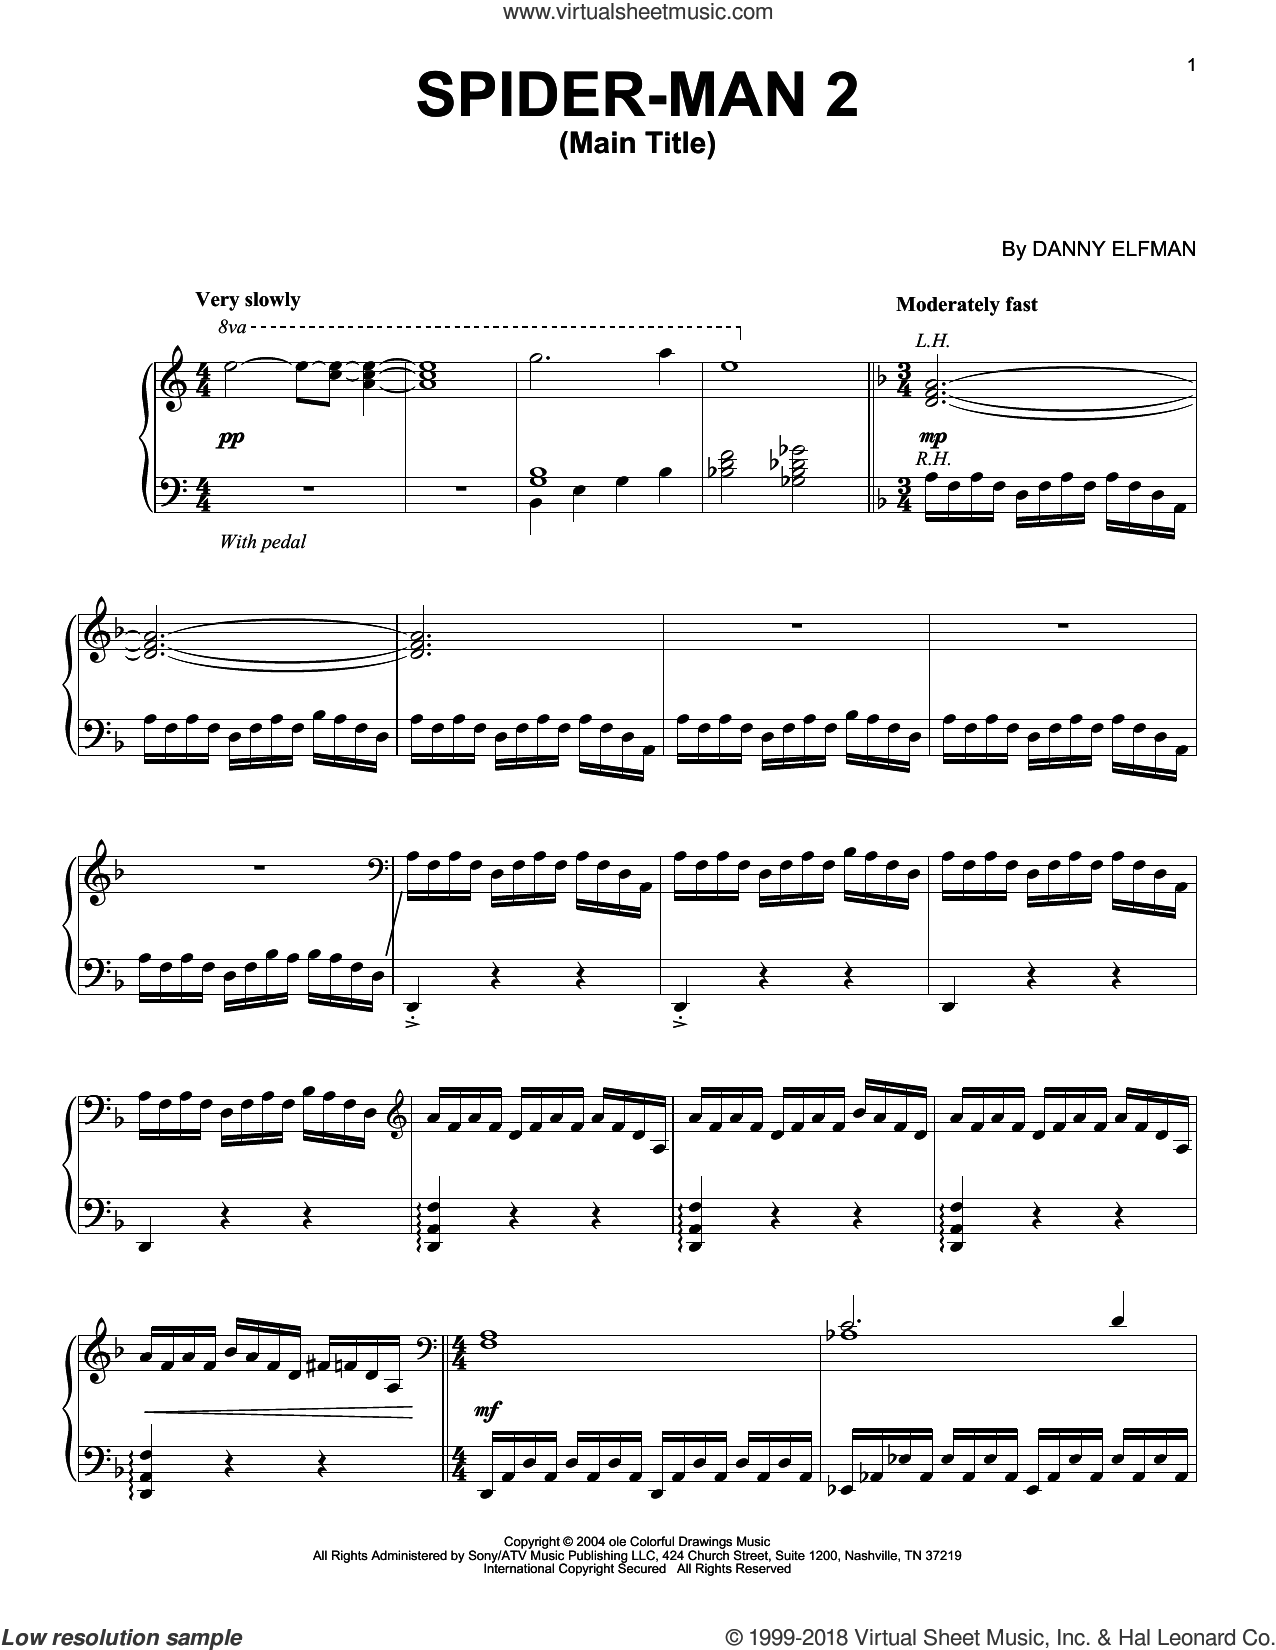 Spider-Man 2 (Main Title) sheet music for piano solo (PDF)